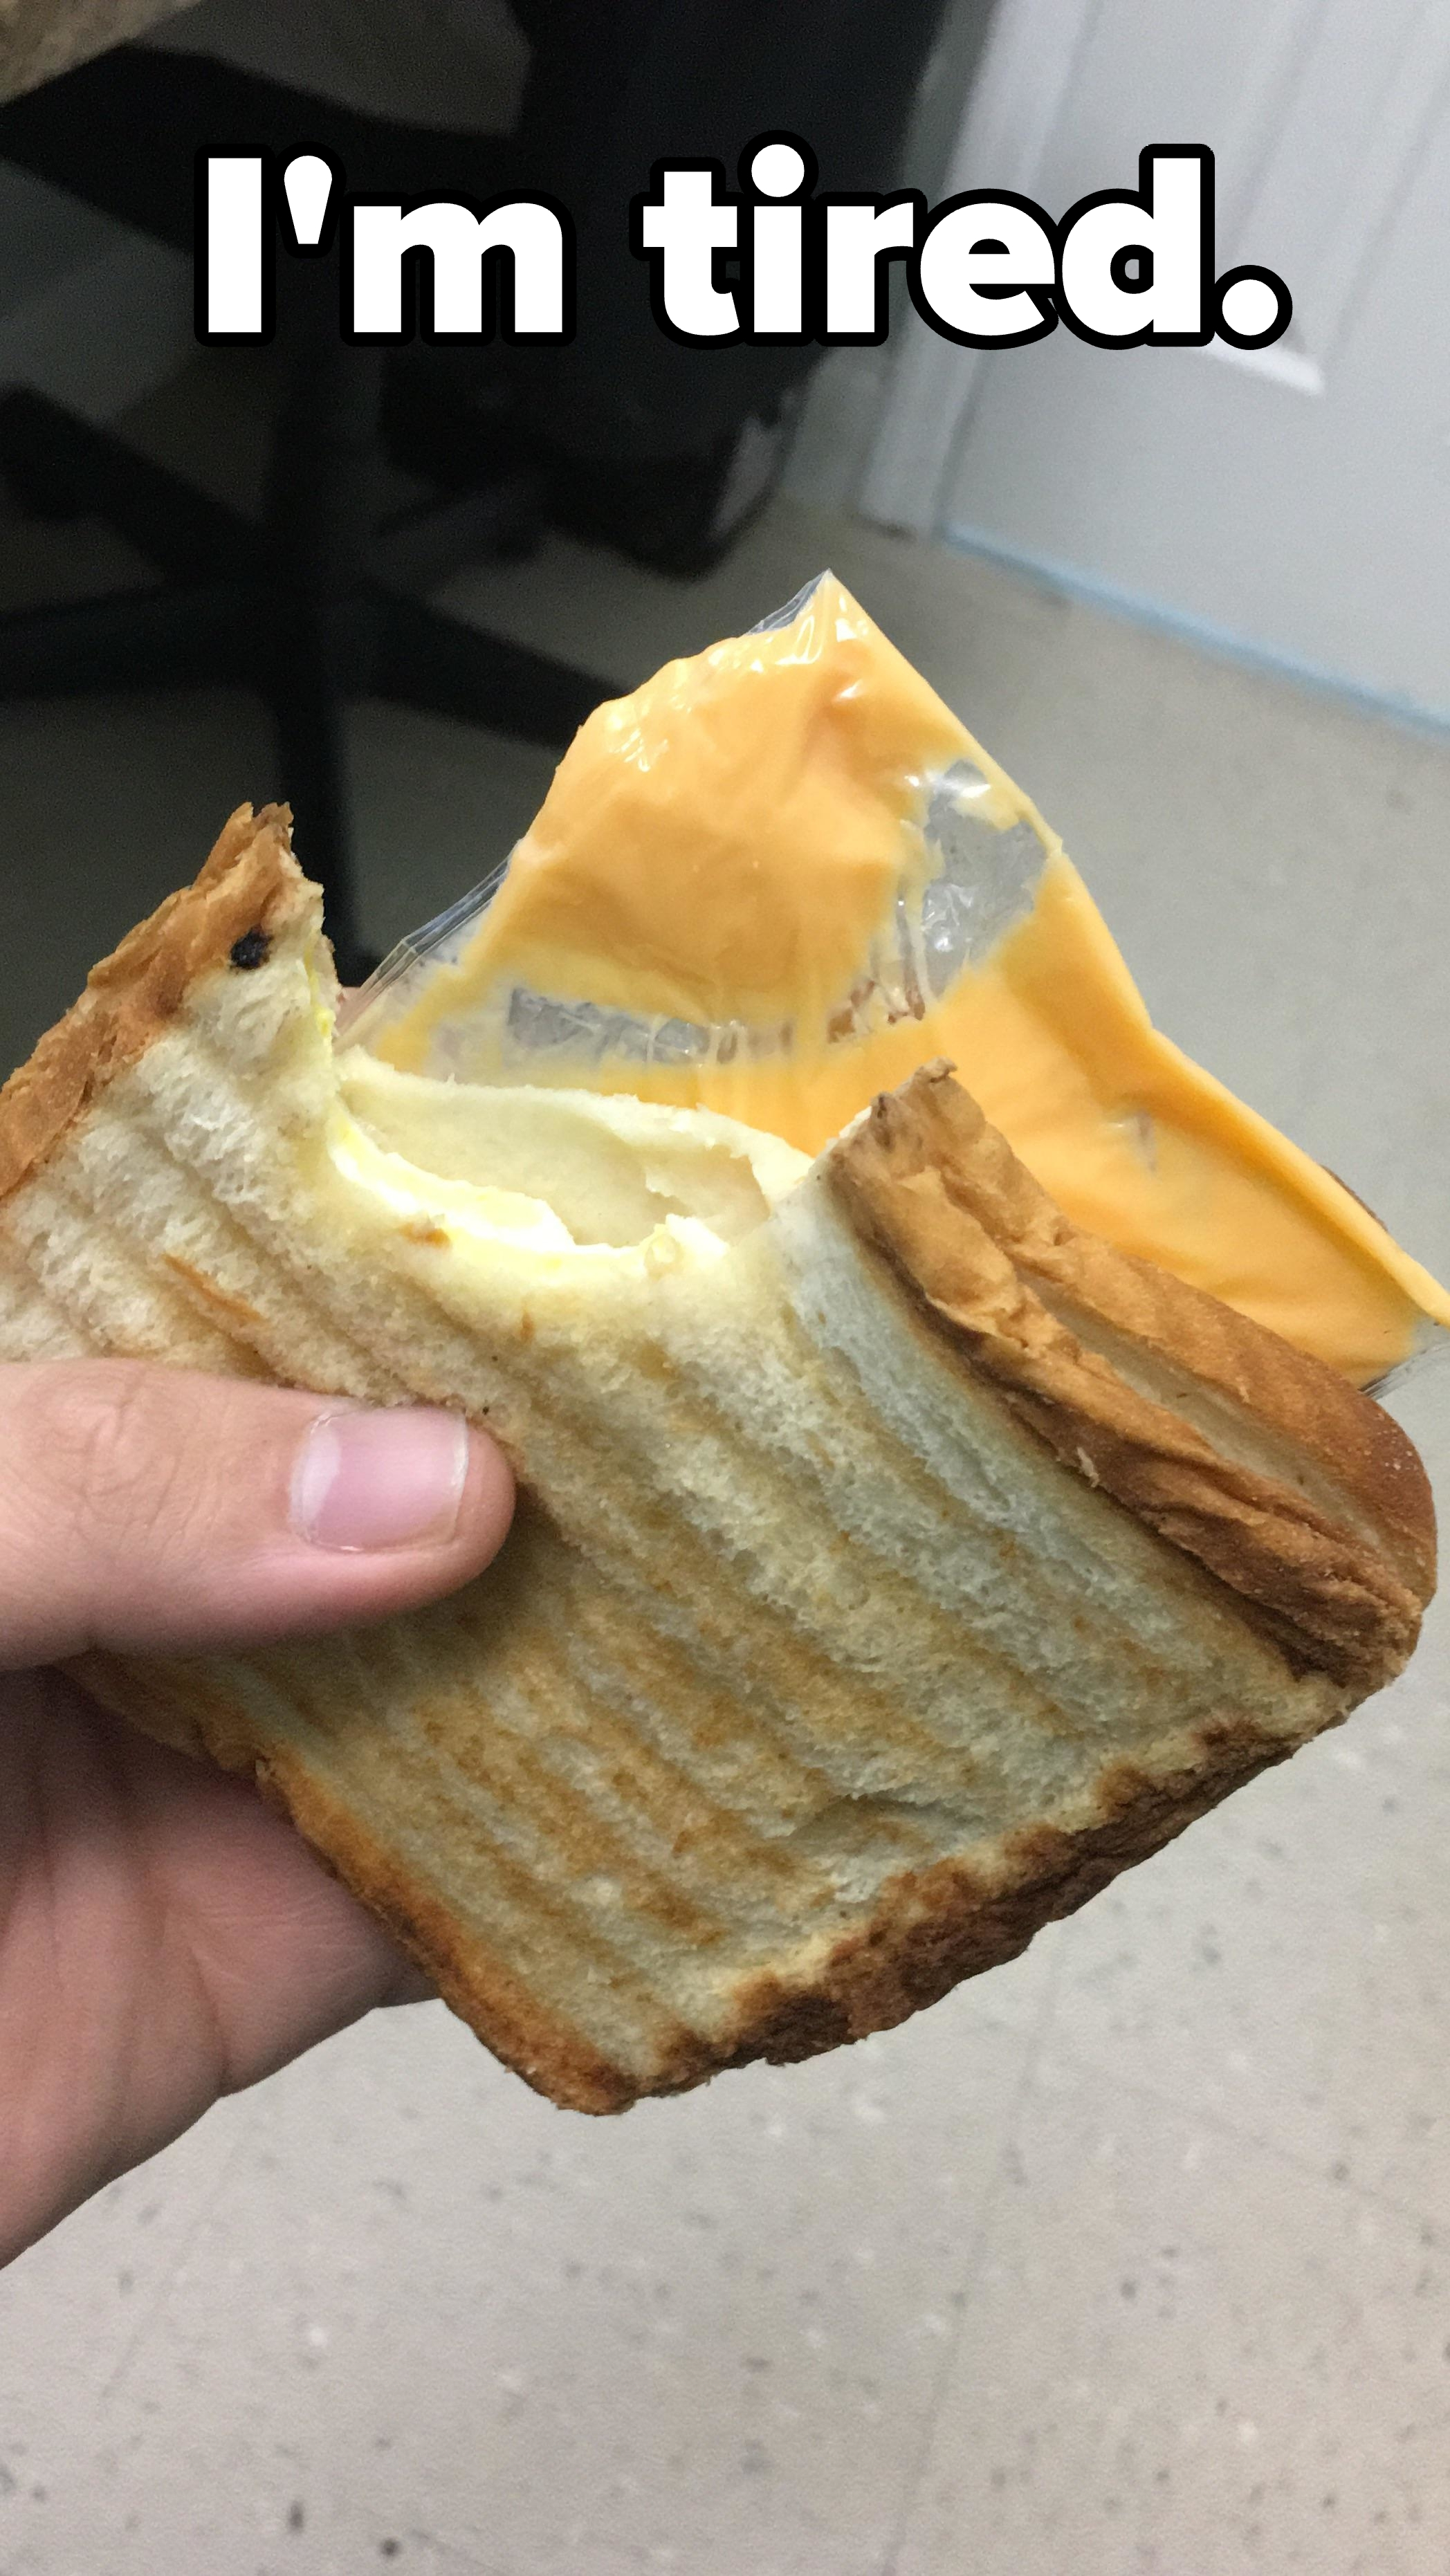 Hand holding a grilled cheese sandwich showing a slice of American cheese still in the plastic, with a bite taken out